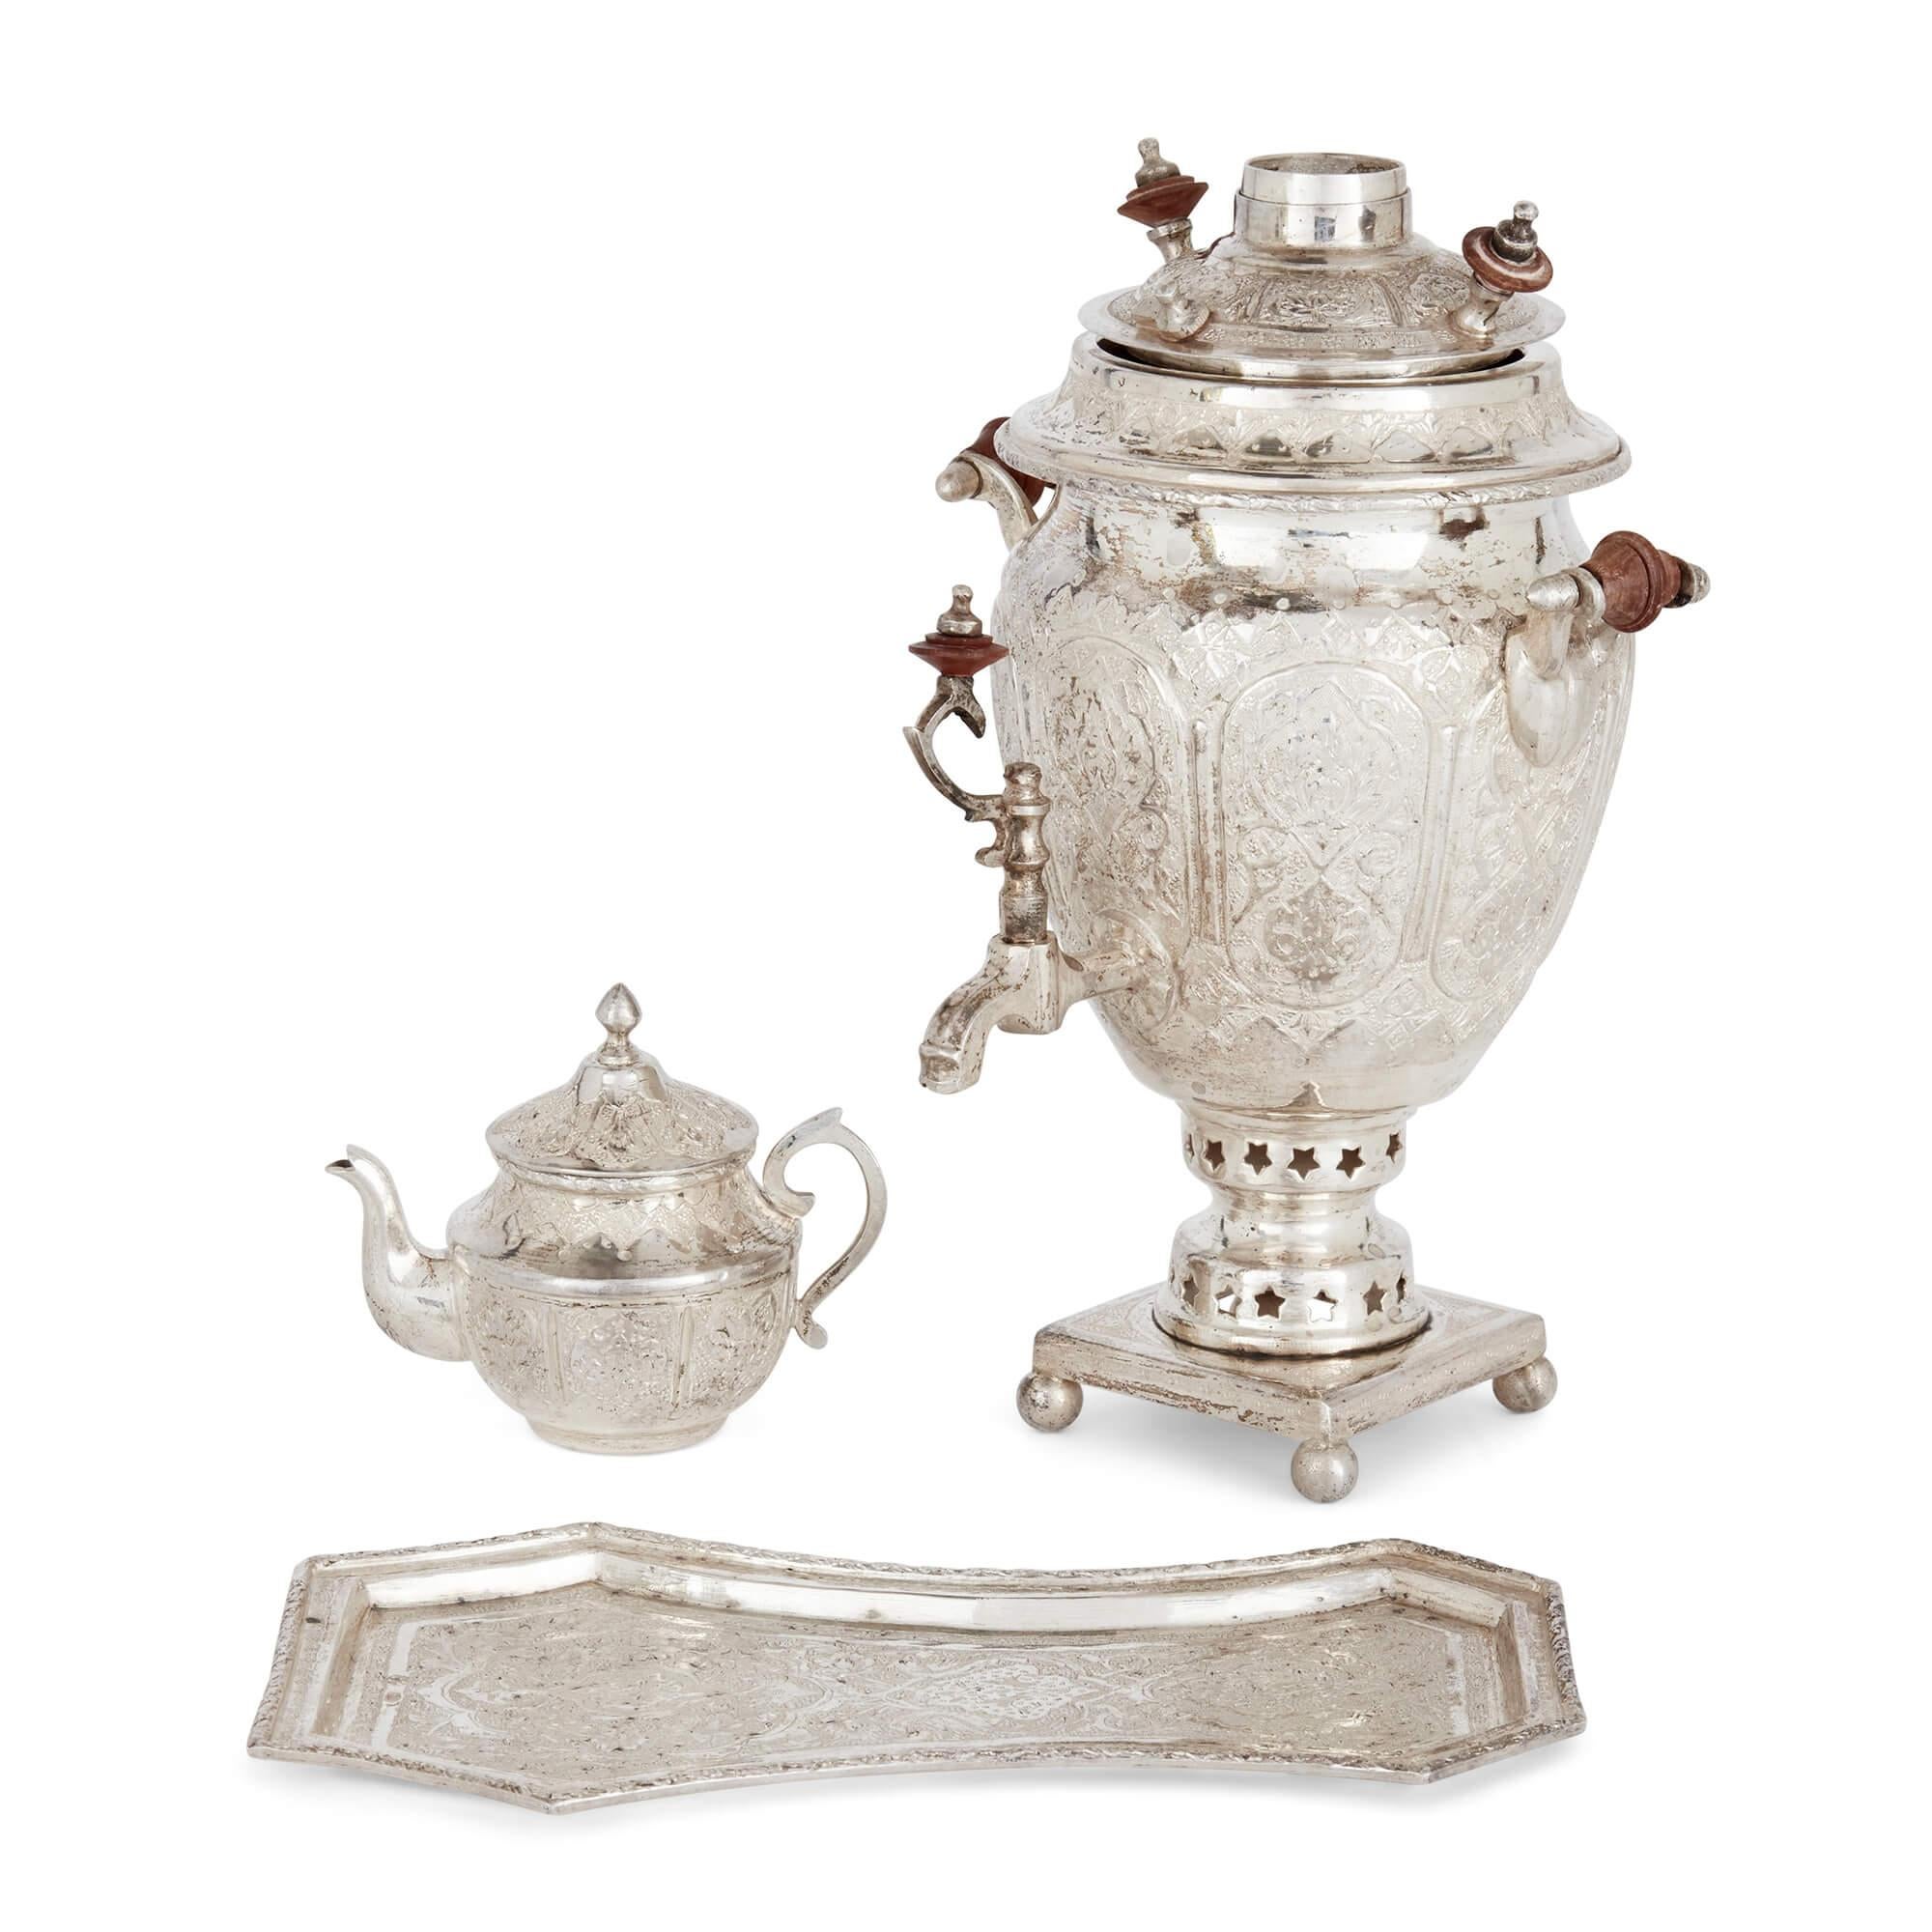 Small engraved silver part-tea service of Persian design
Persian, 20th Century
Samovar: Height 23cm, width 16cm, depth 15cm
Teapot: Height 9cm, width 10cm, depth 6.5cm

Decorated with elaborate Persian designs, this excellent tea service comprises a